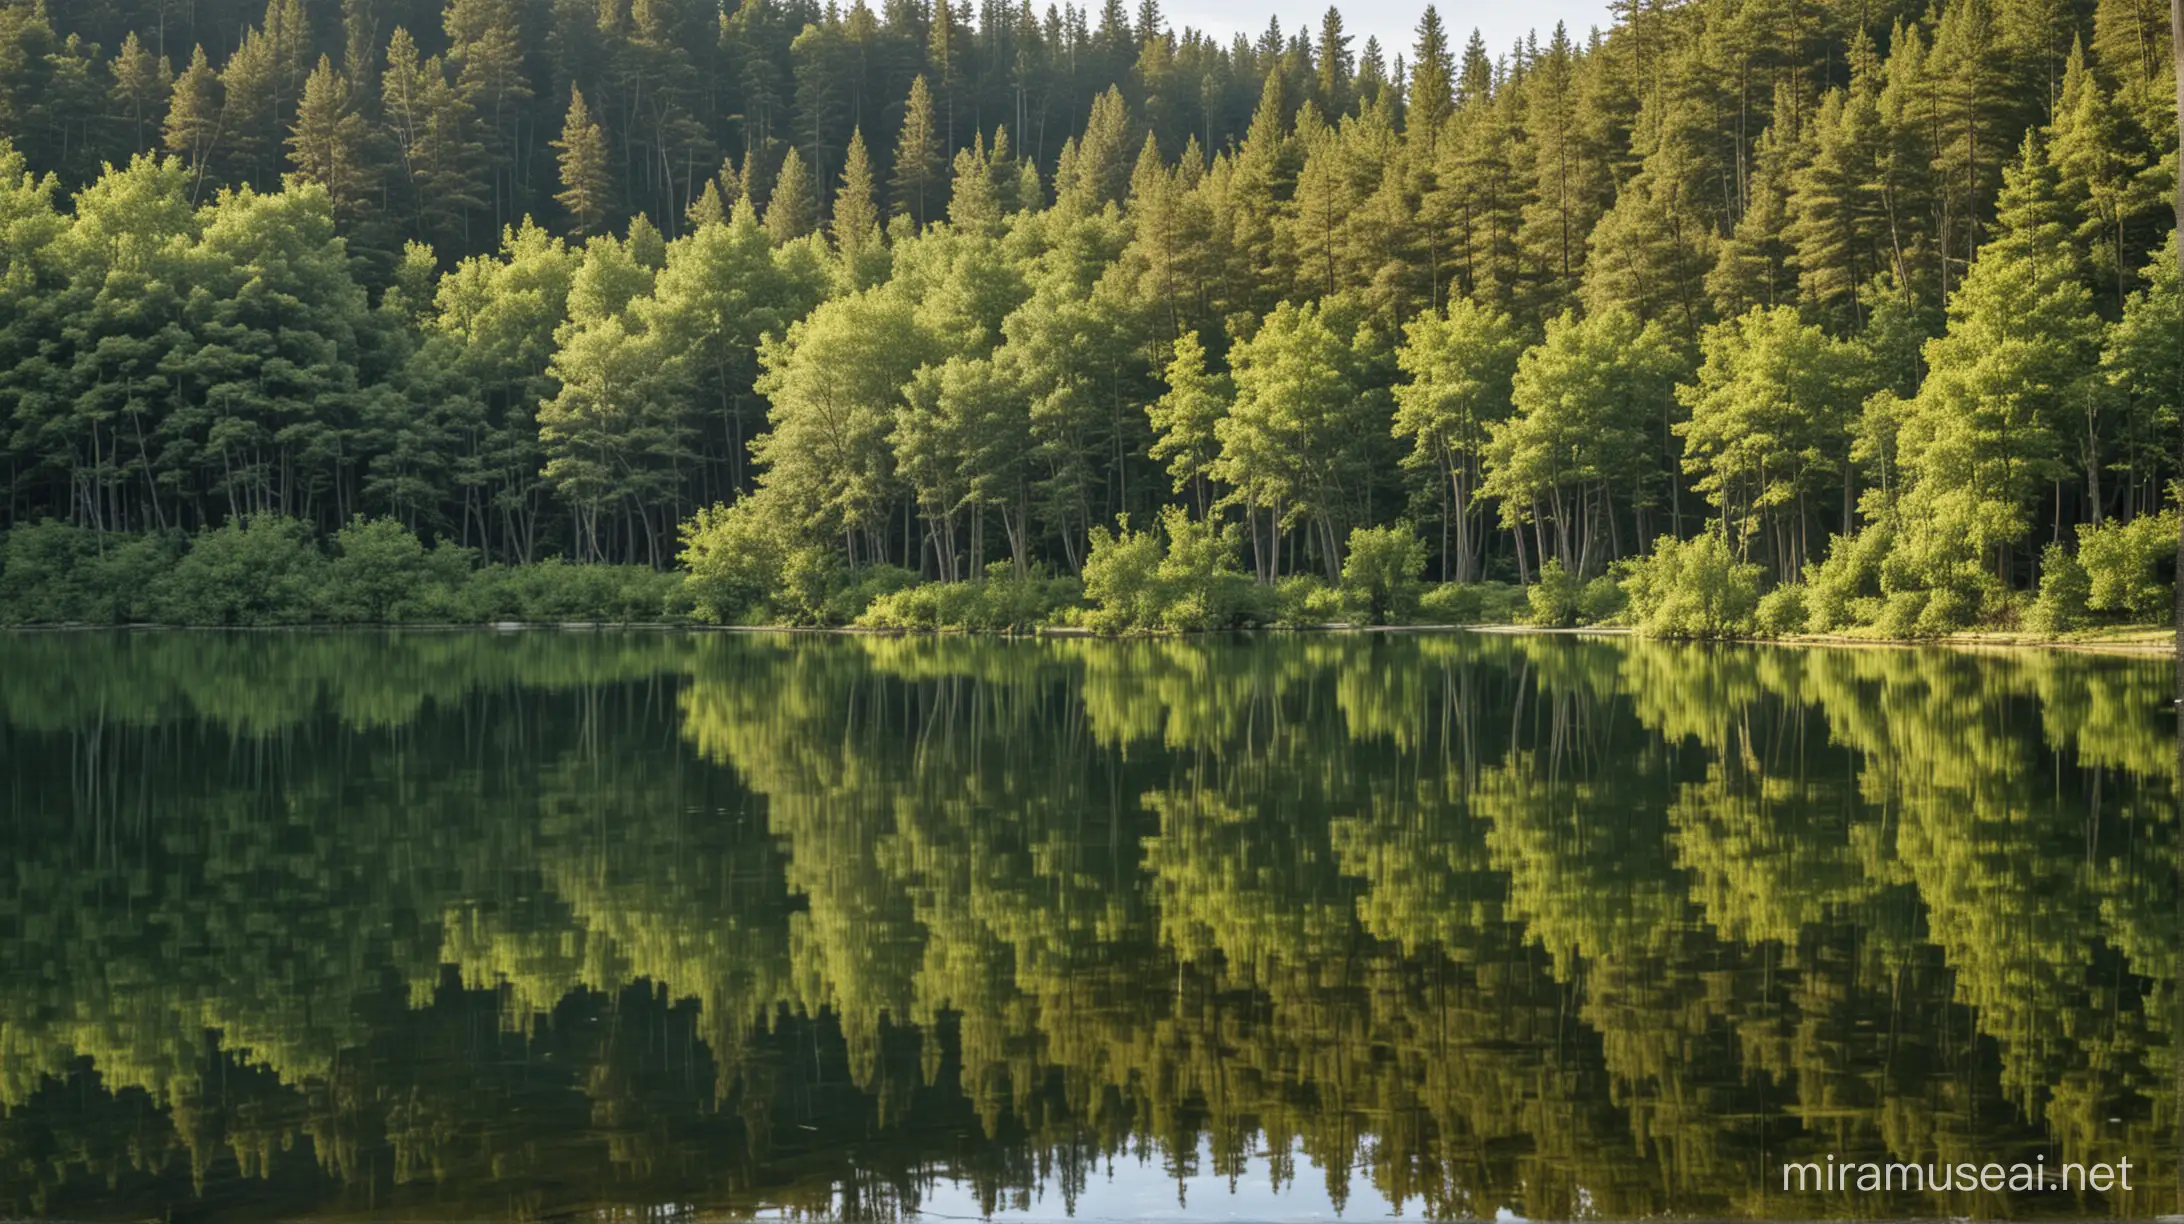 A serene lake filled with reflections of surrounding trees